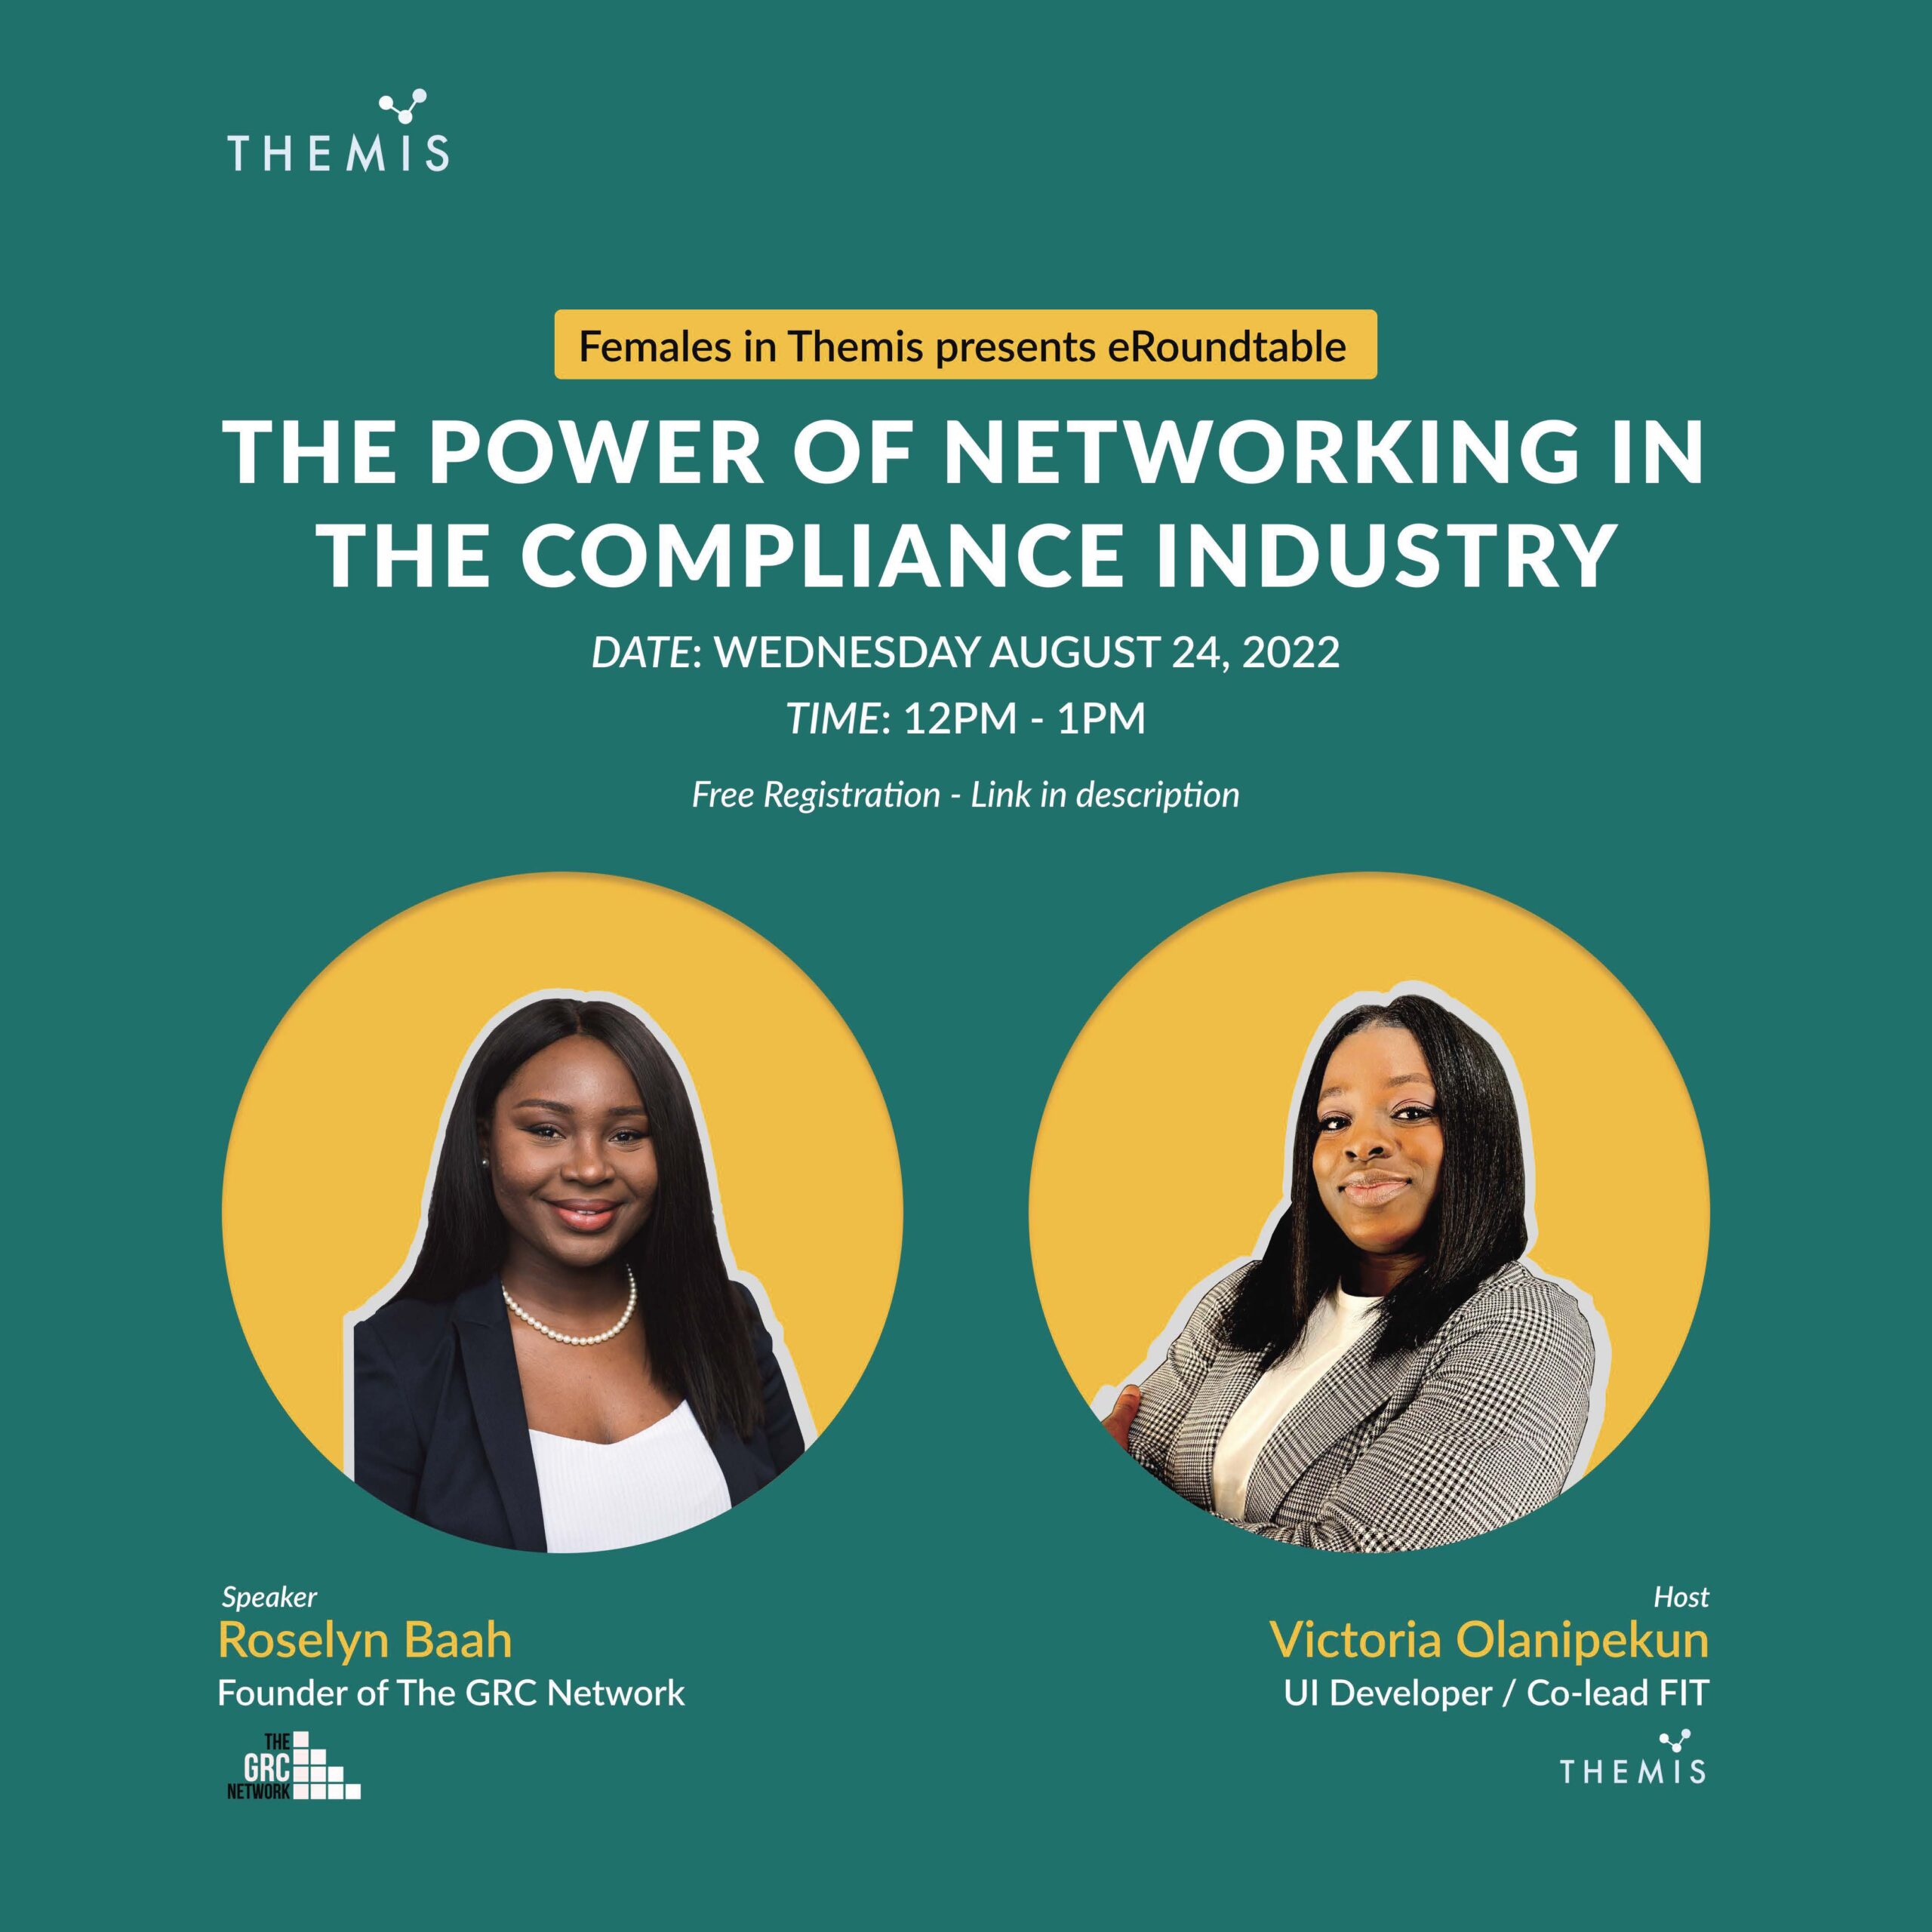 THE POWER OF NETWORKING IN THE COMPLIANCE INDUSTRY